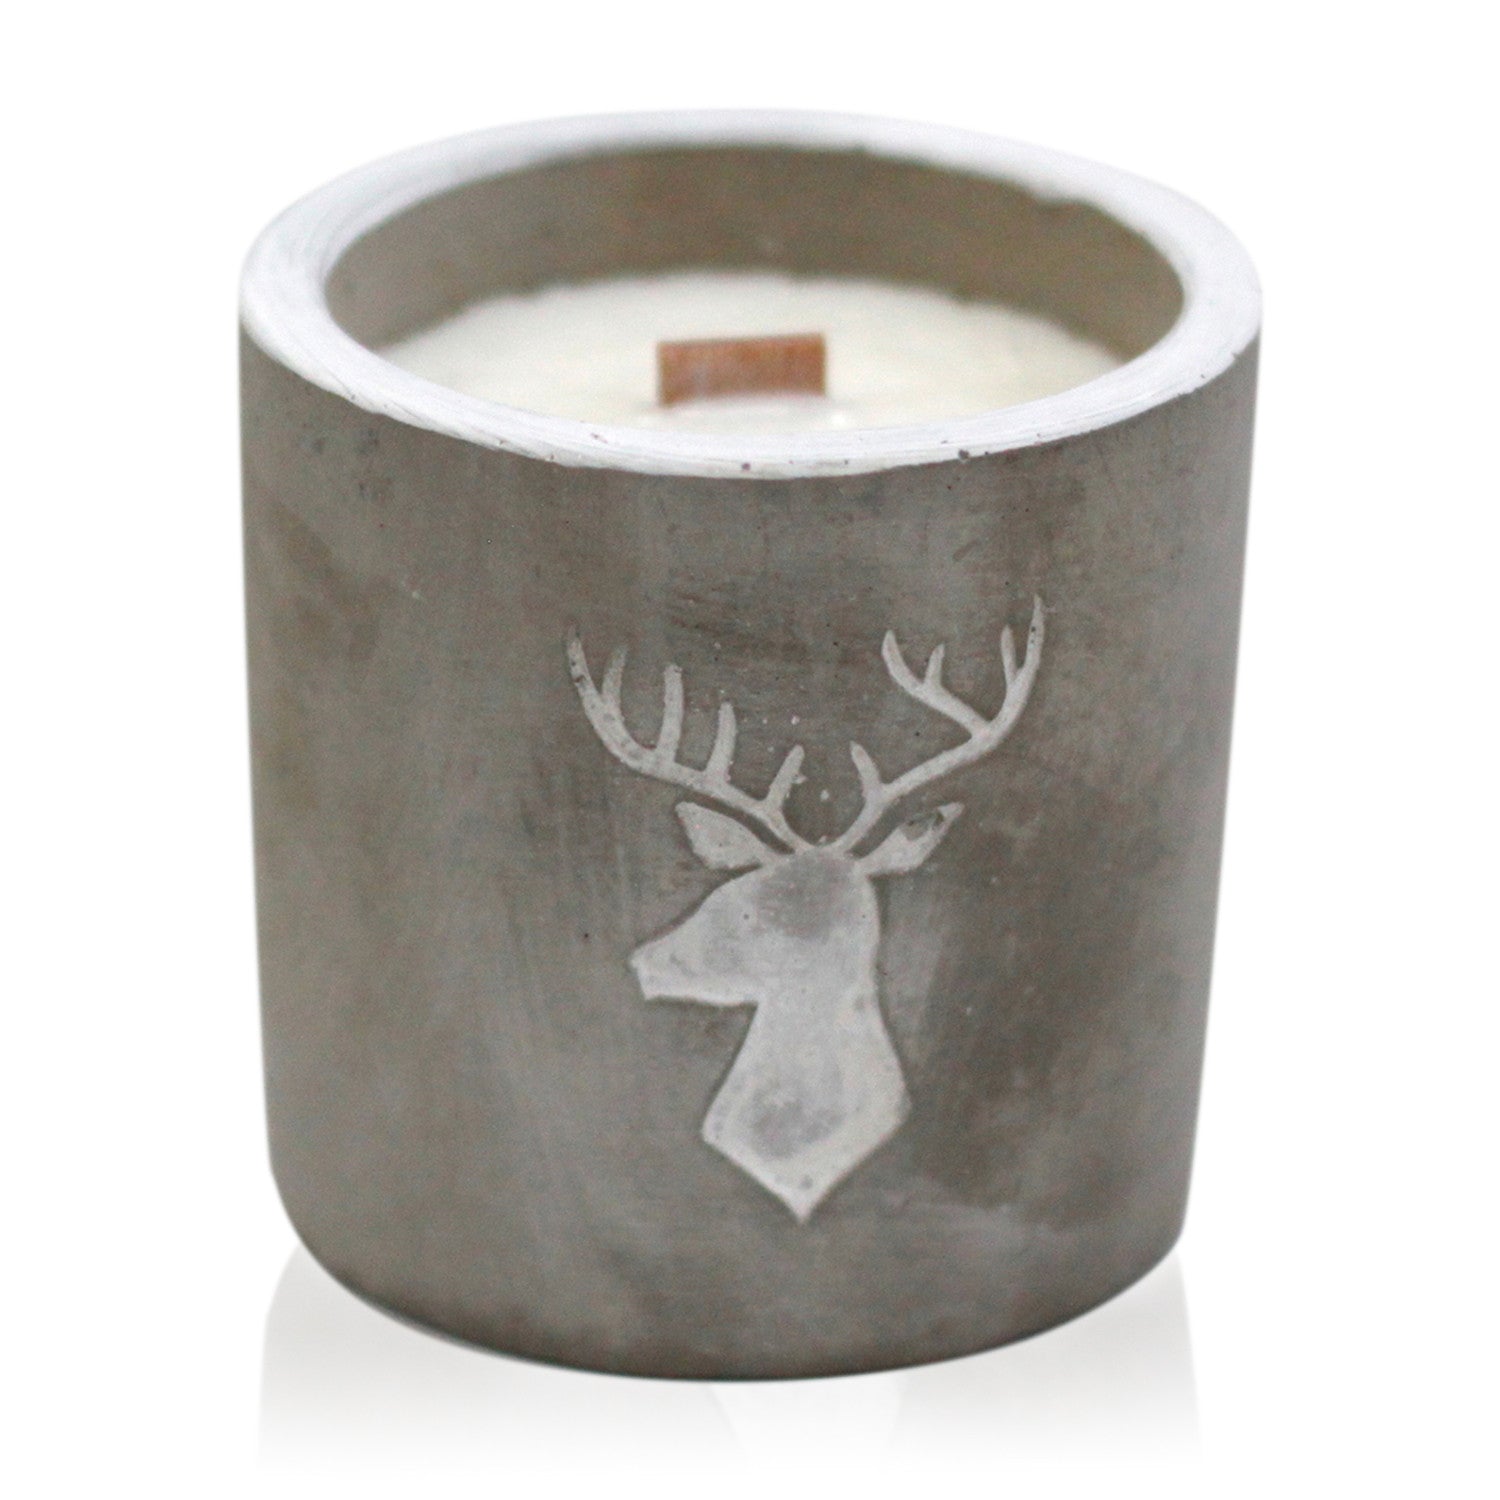 Concrete Wooden Wick Candles - Med Pot